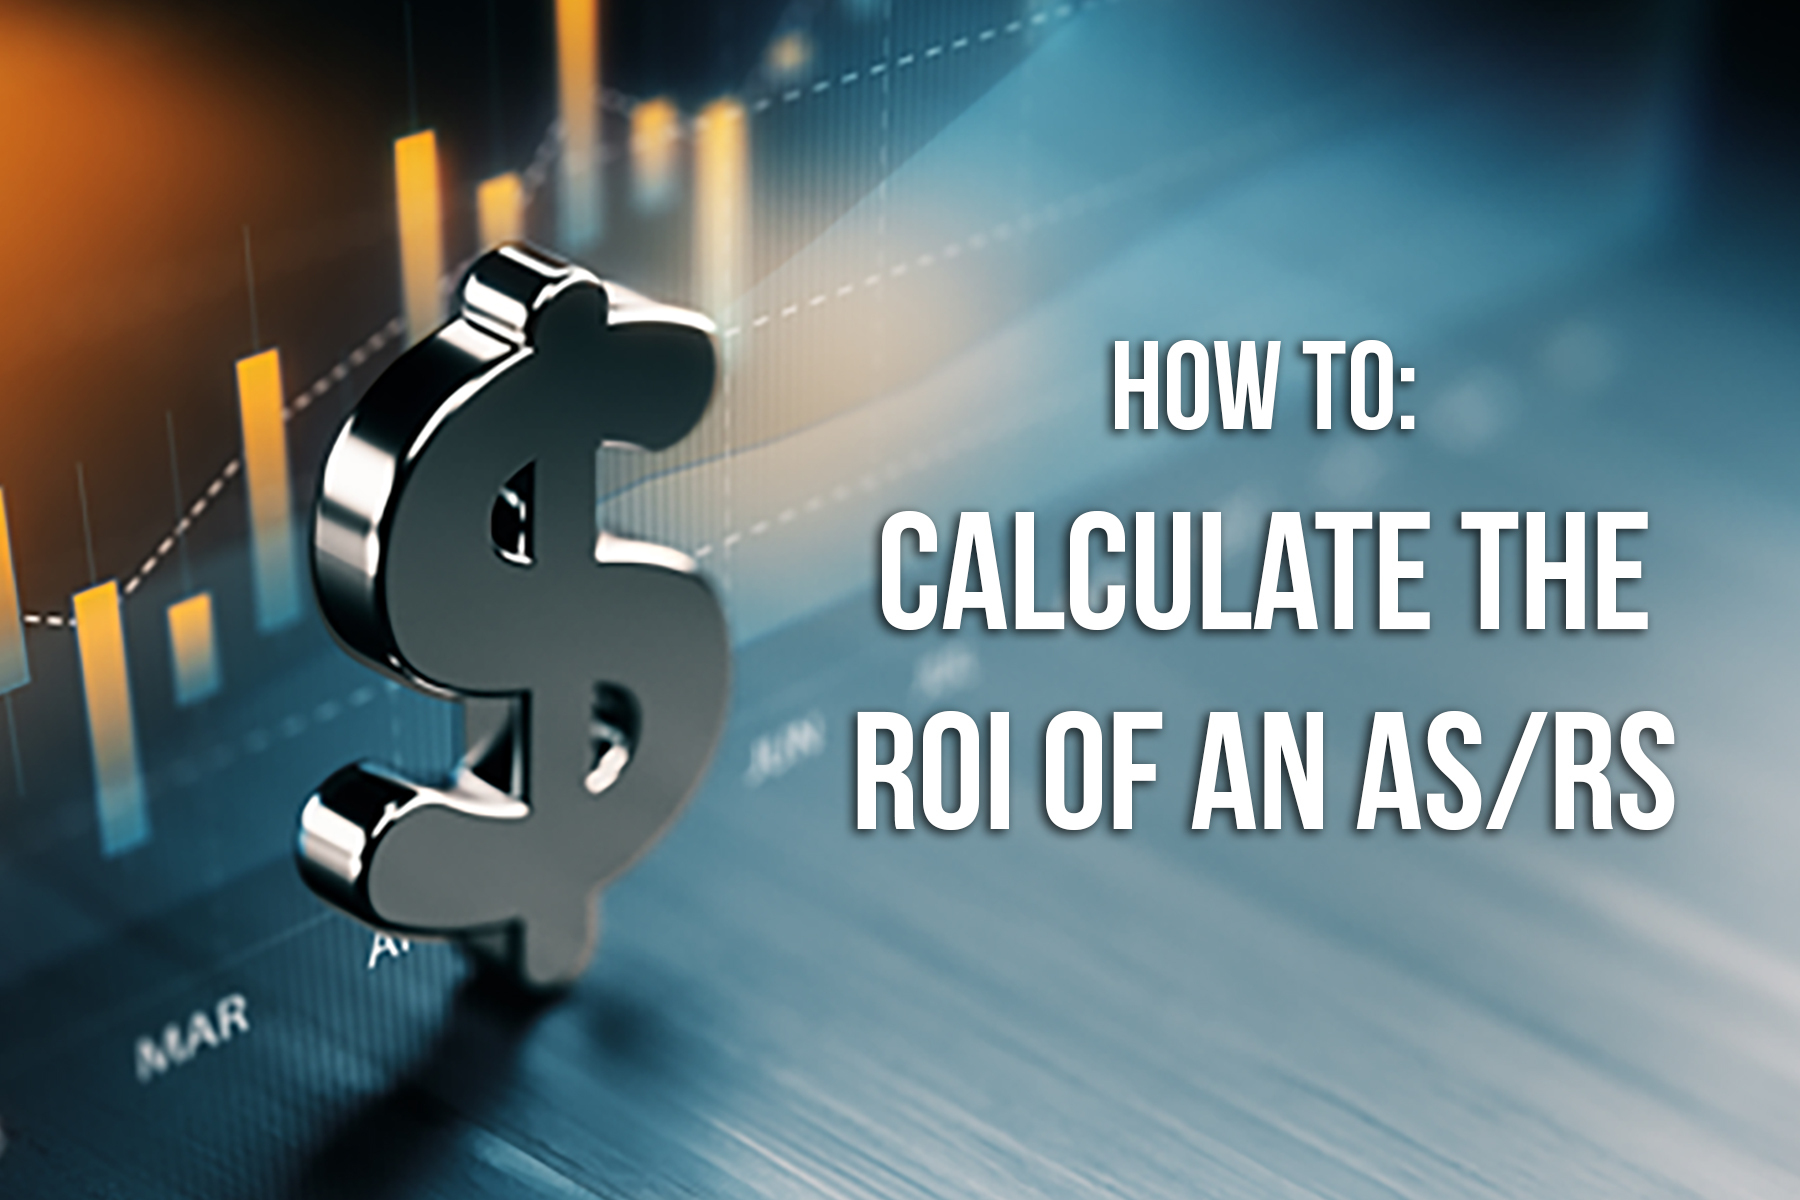 Calculate the ROI of an ASRS